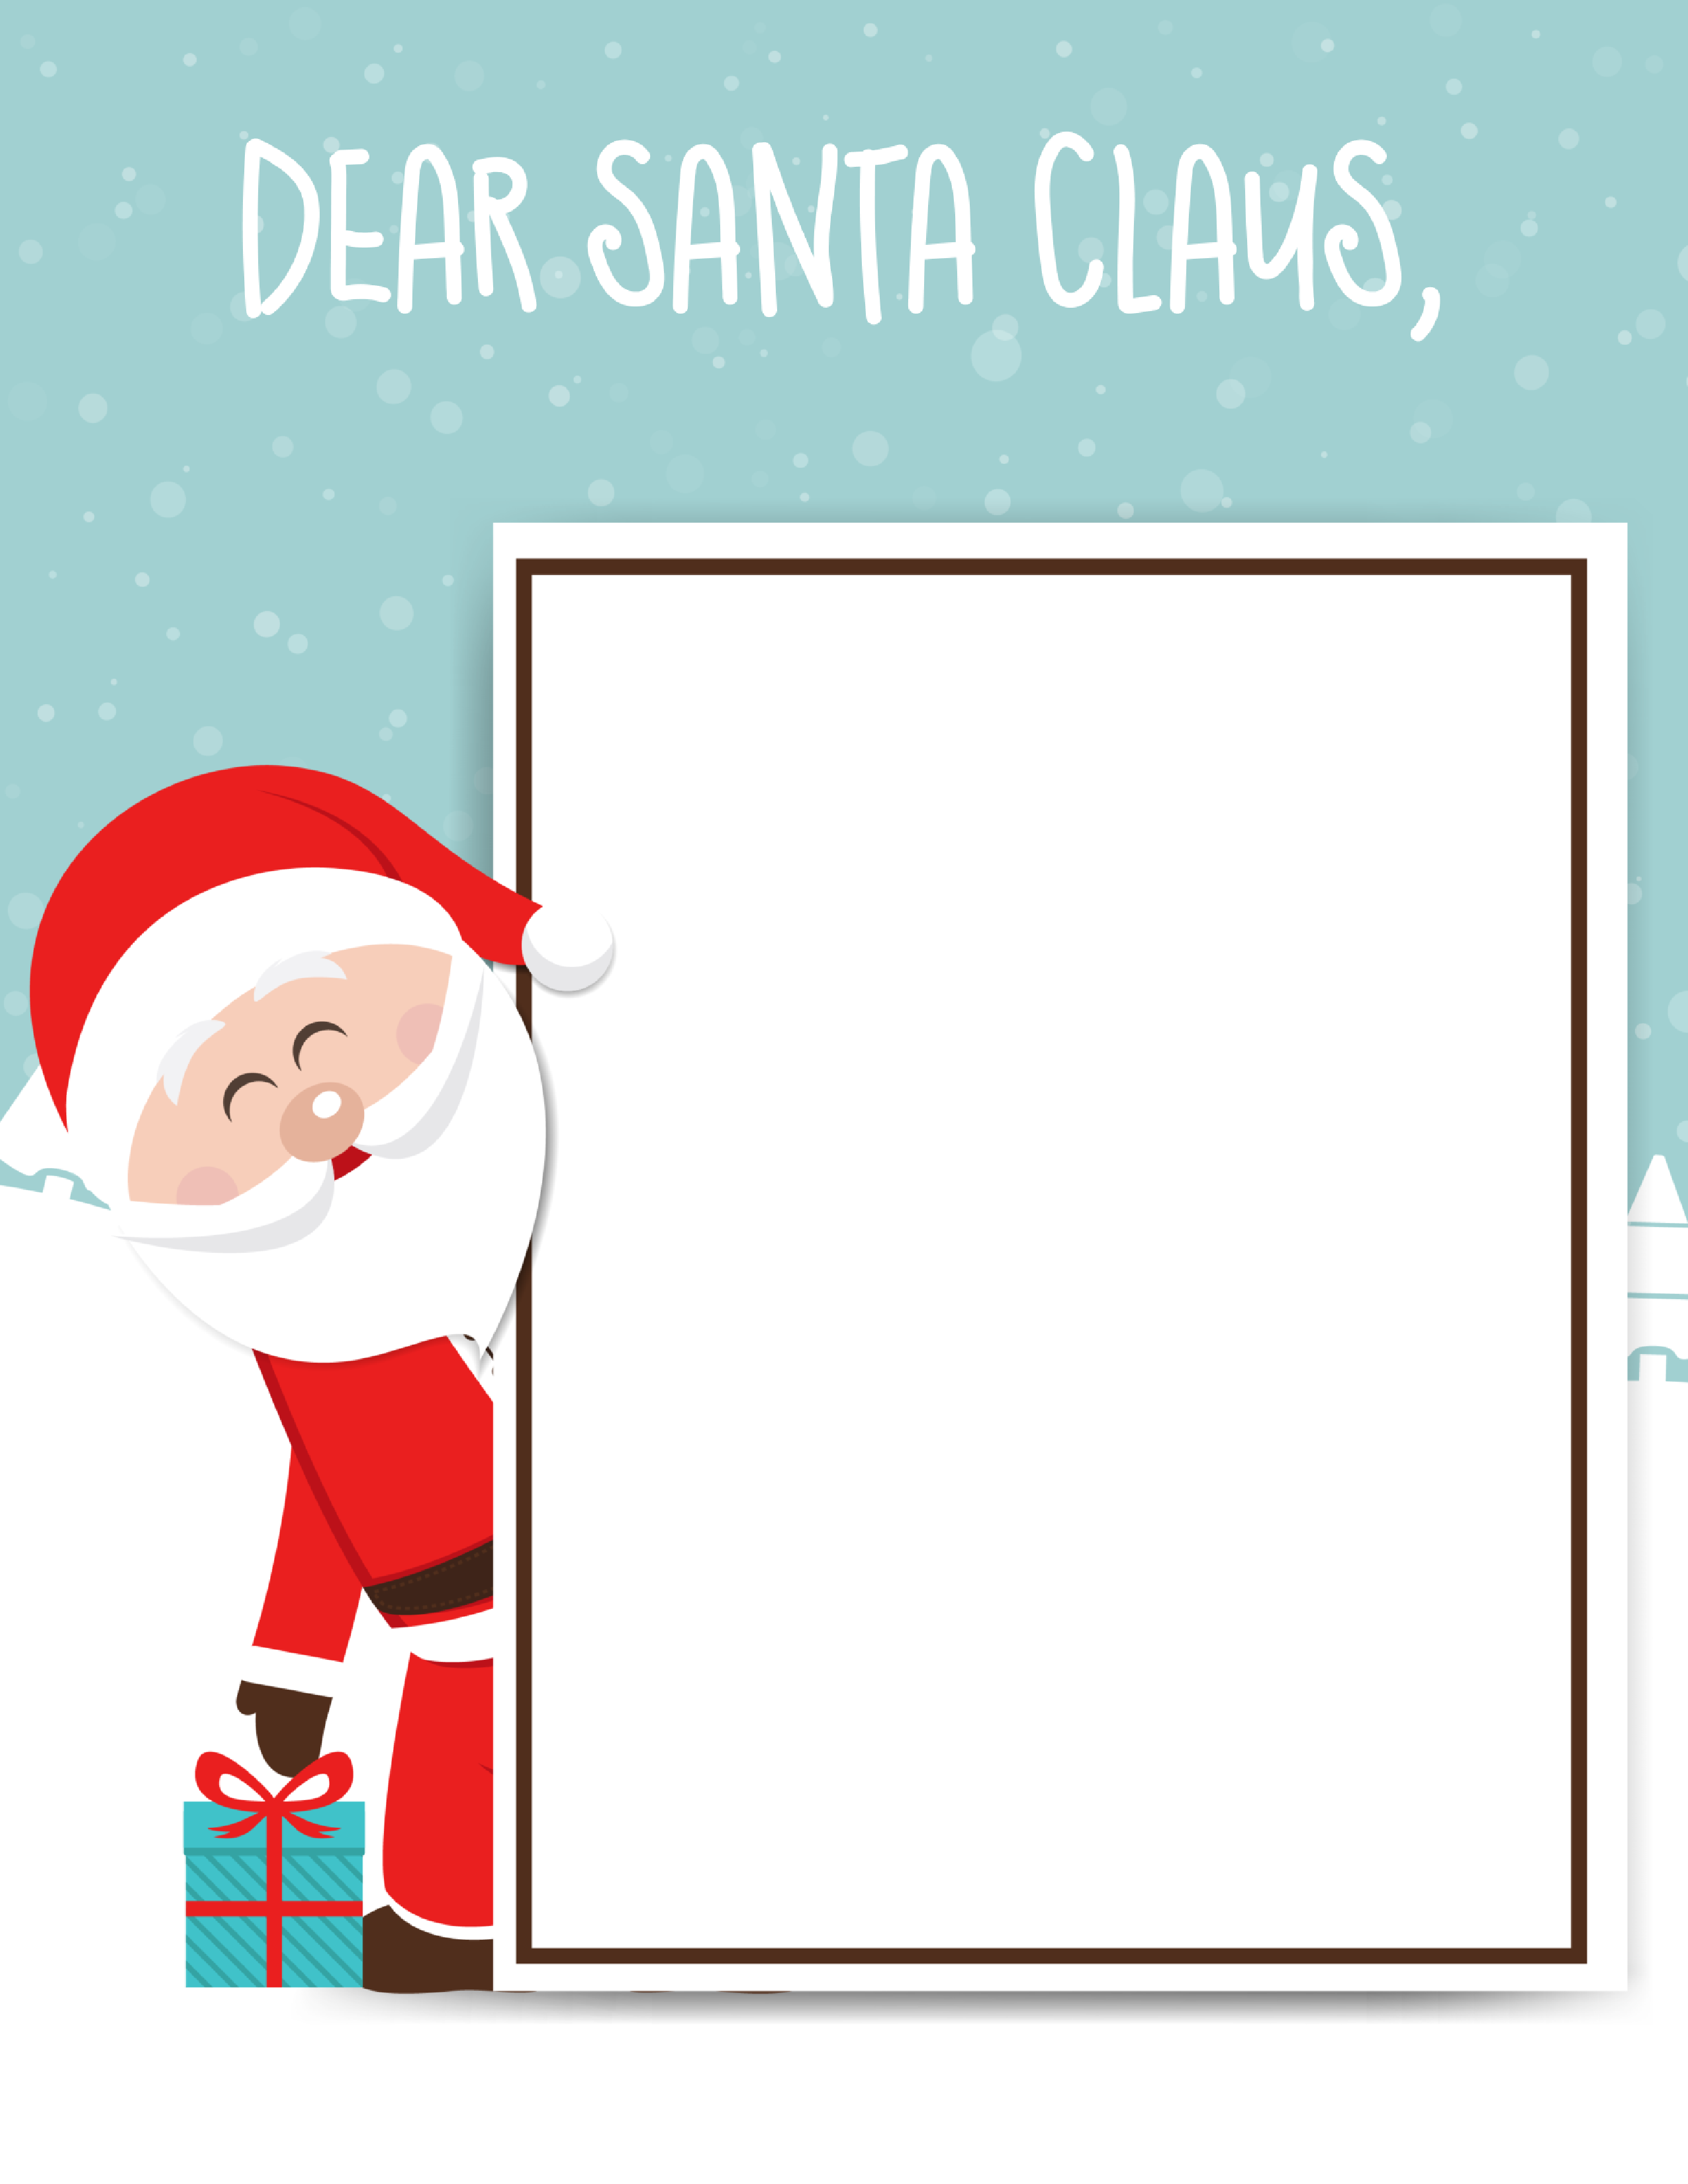 Santa Claus Letter Template for kids, draw a picture, write a letter, or create a list with this FREE Santa Claus Download